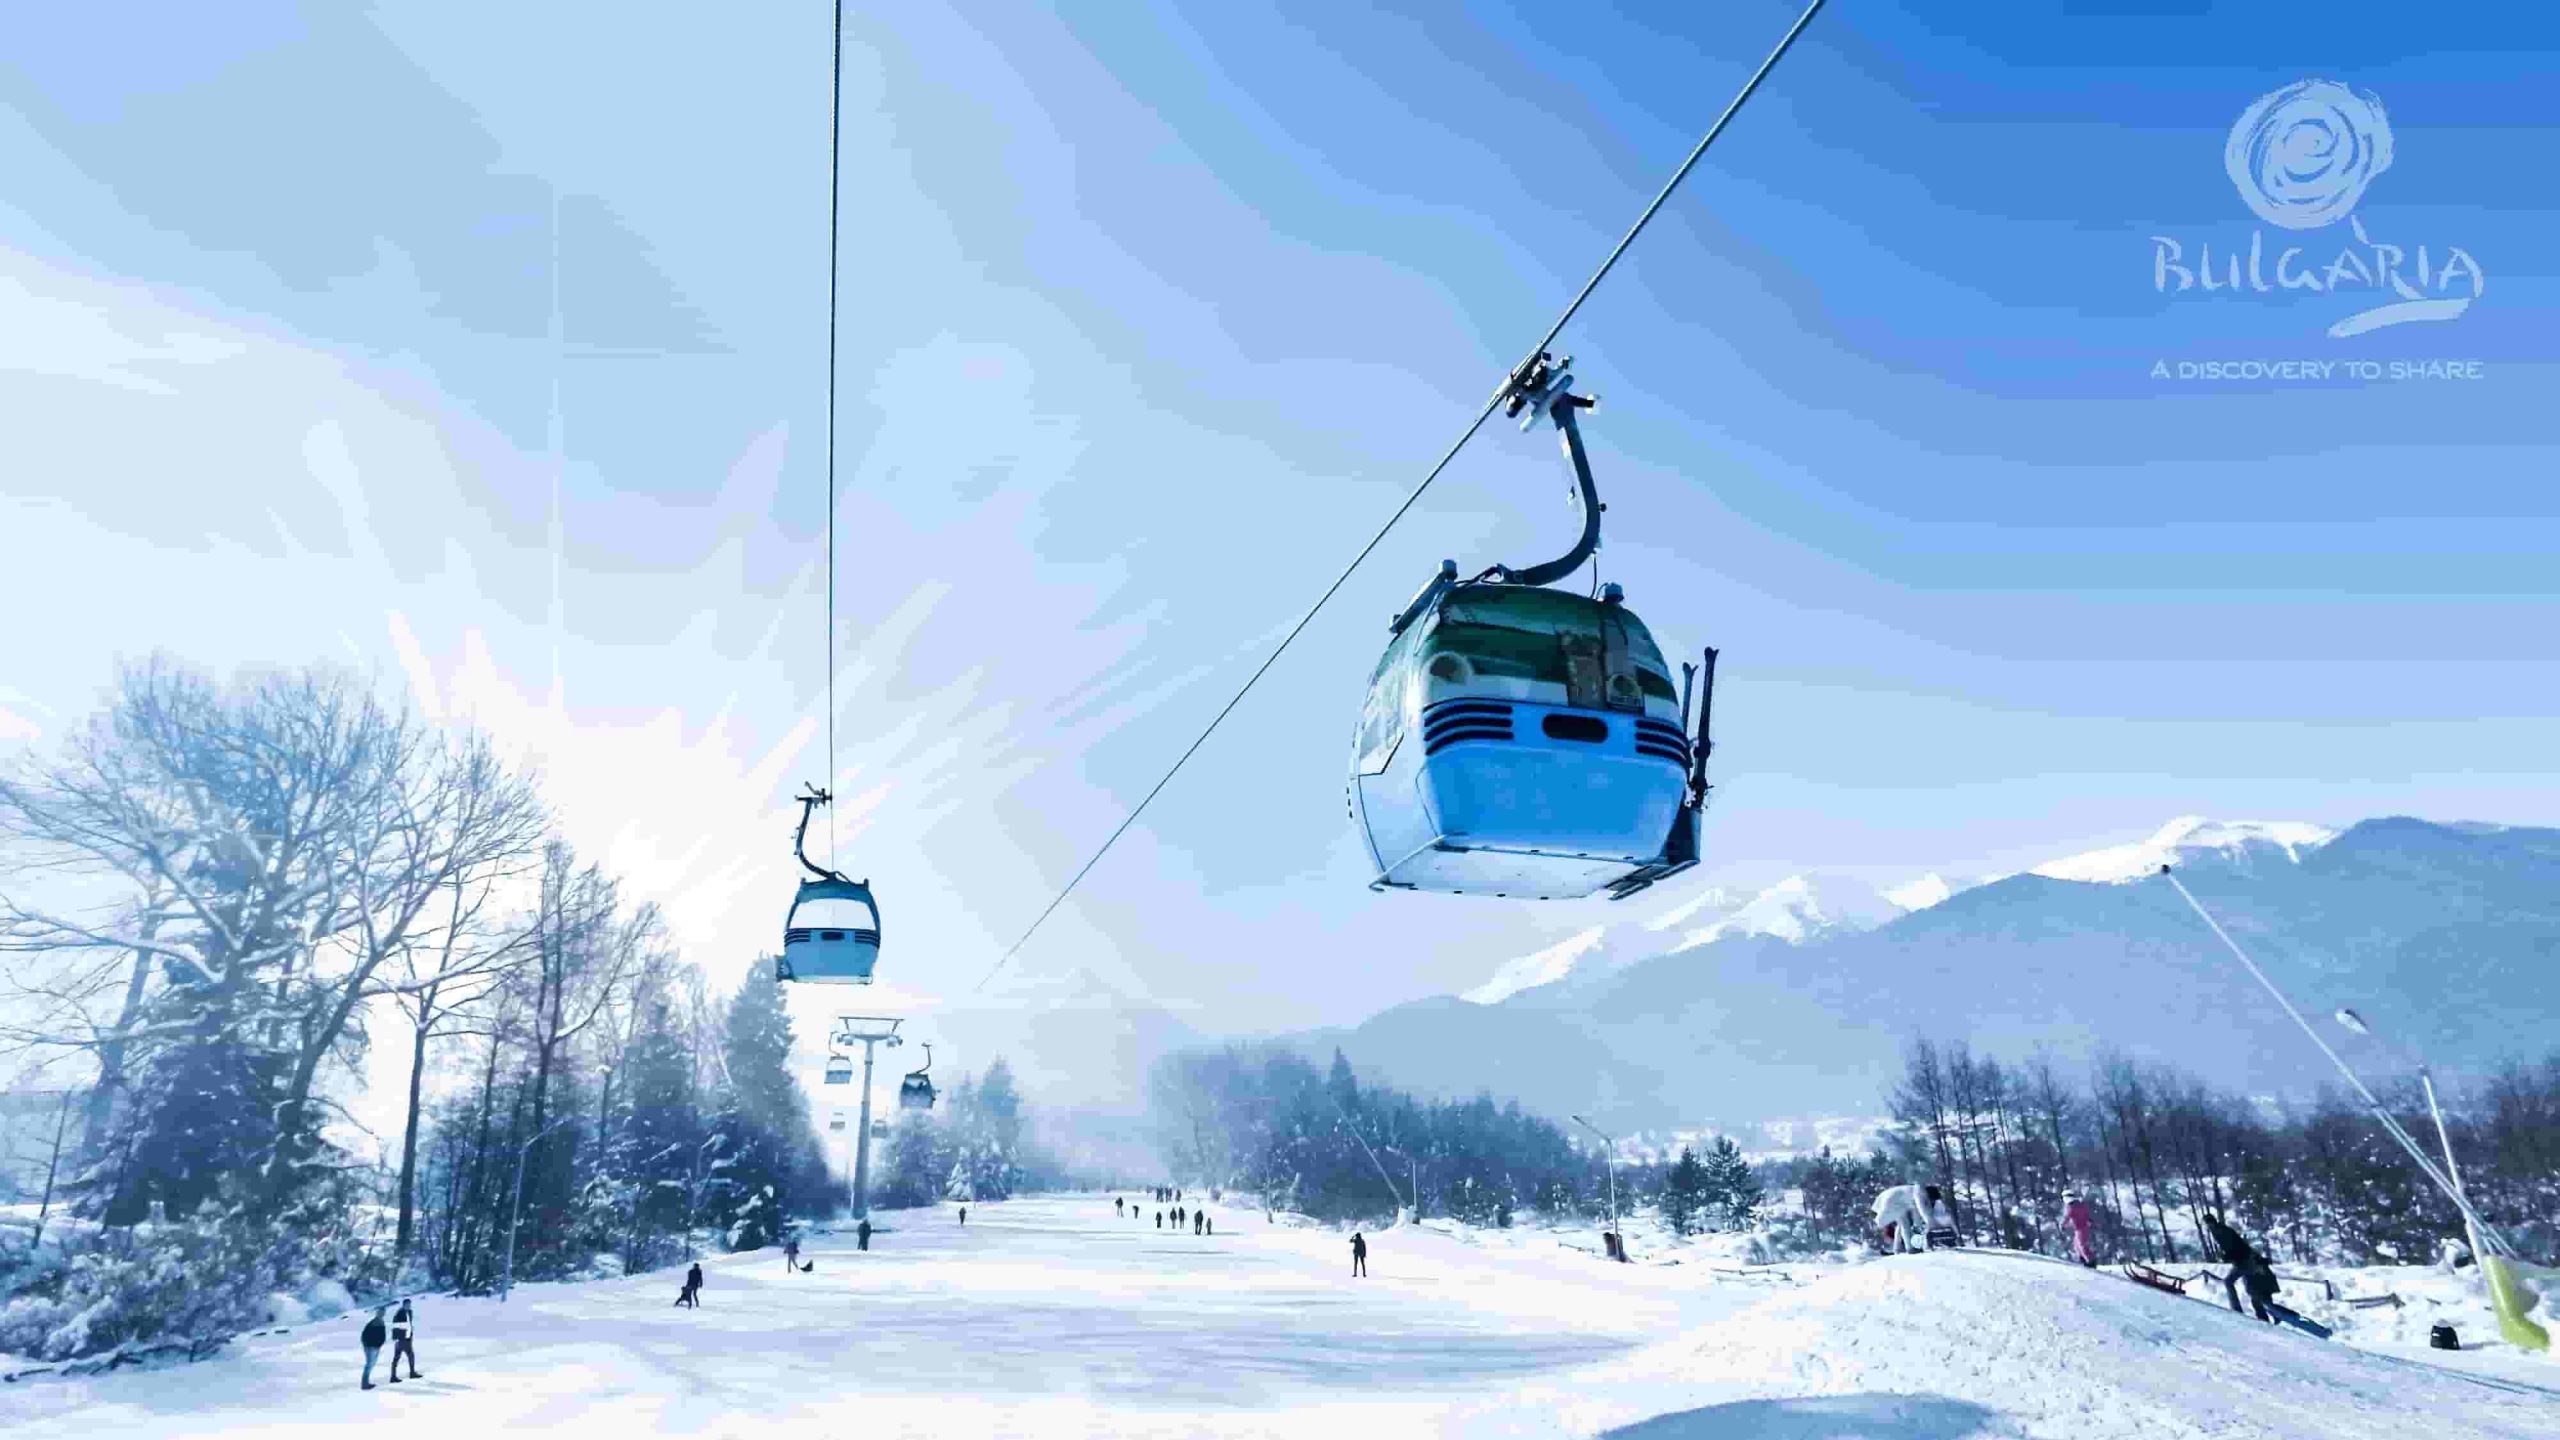 A ski lift carrying people up a snowy mountain, surrounded by a picturesque winter landscape.